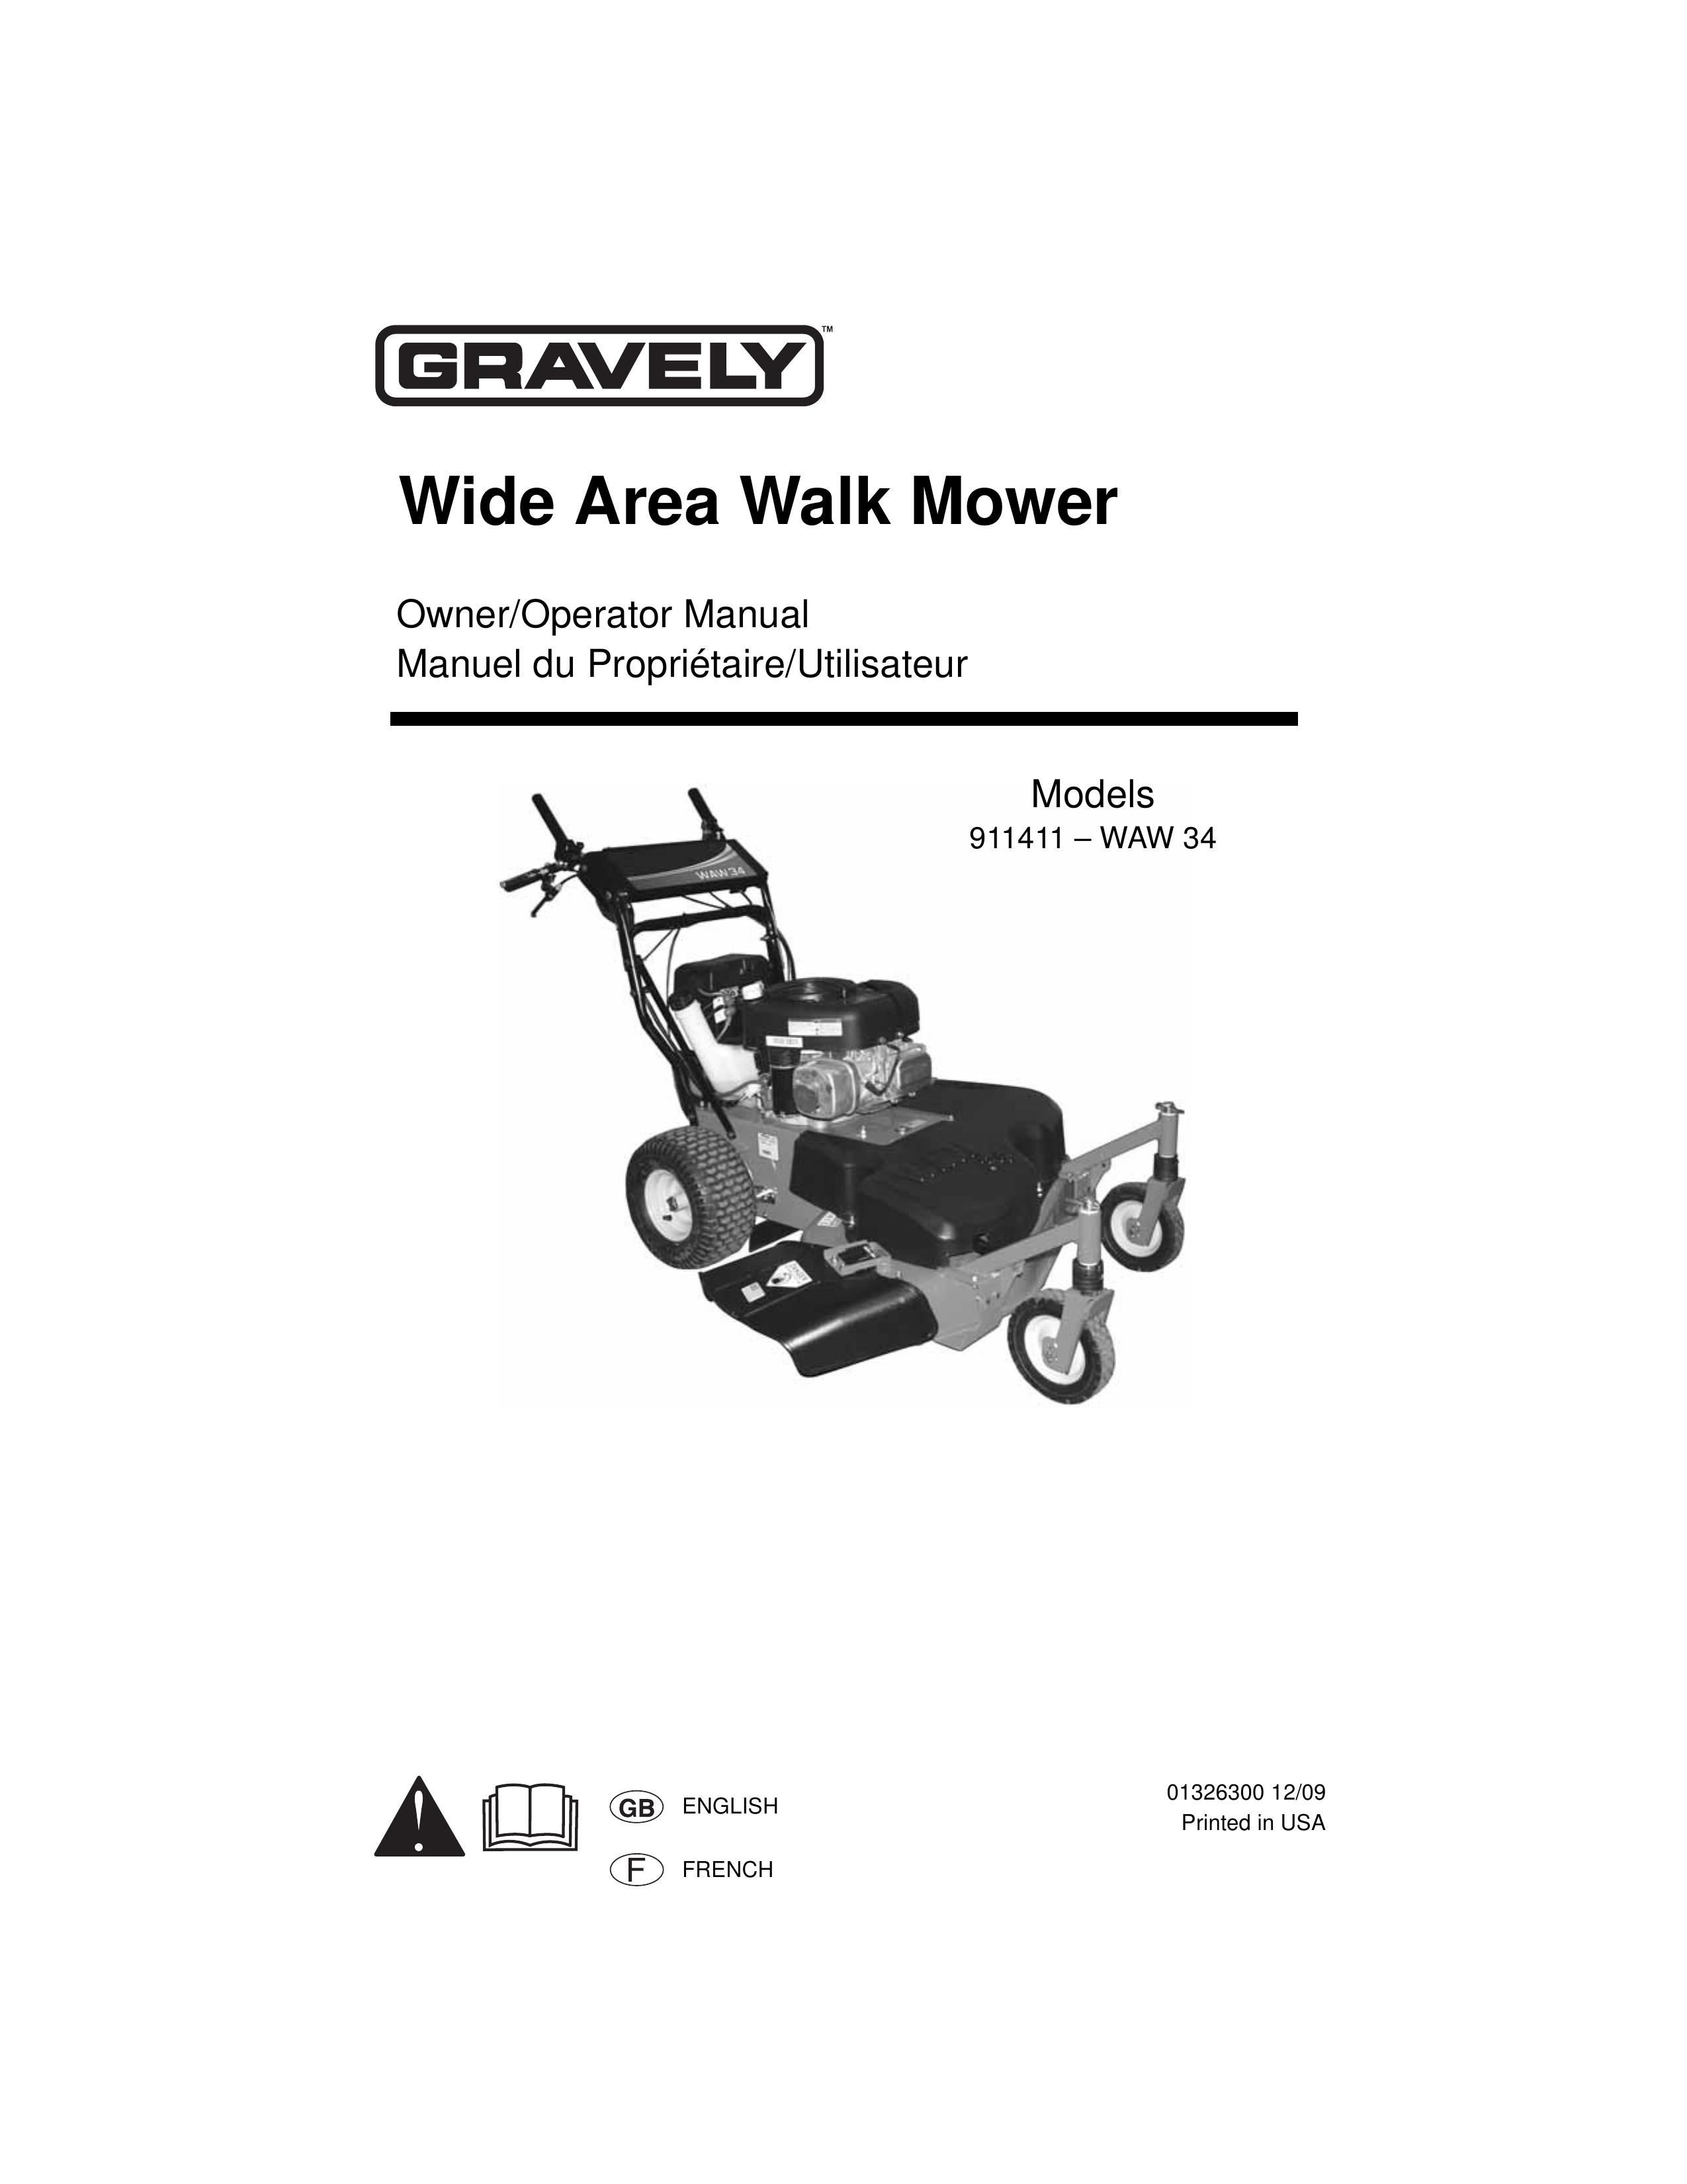 Gravely 911411 WAW 34 Lawn Mower User Manual